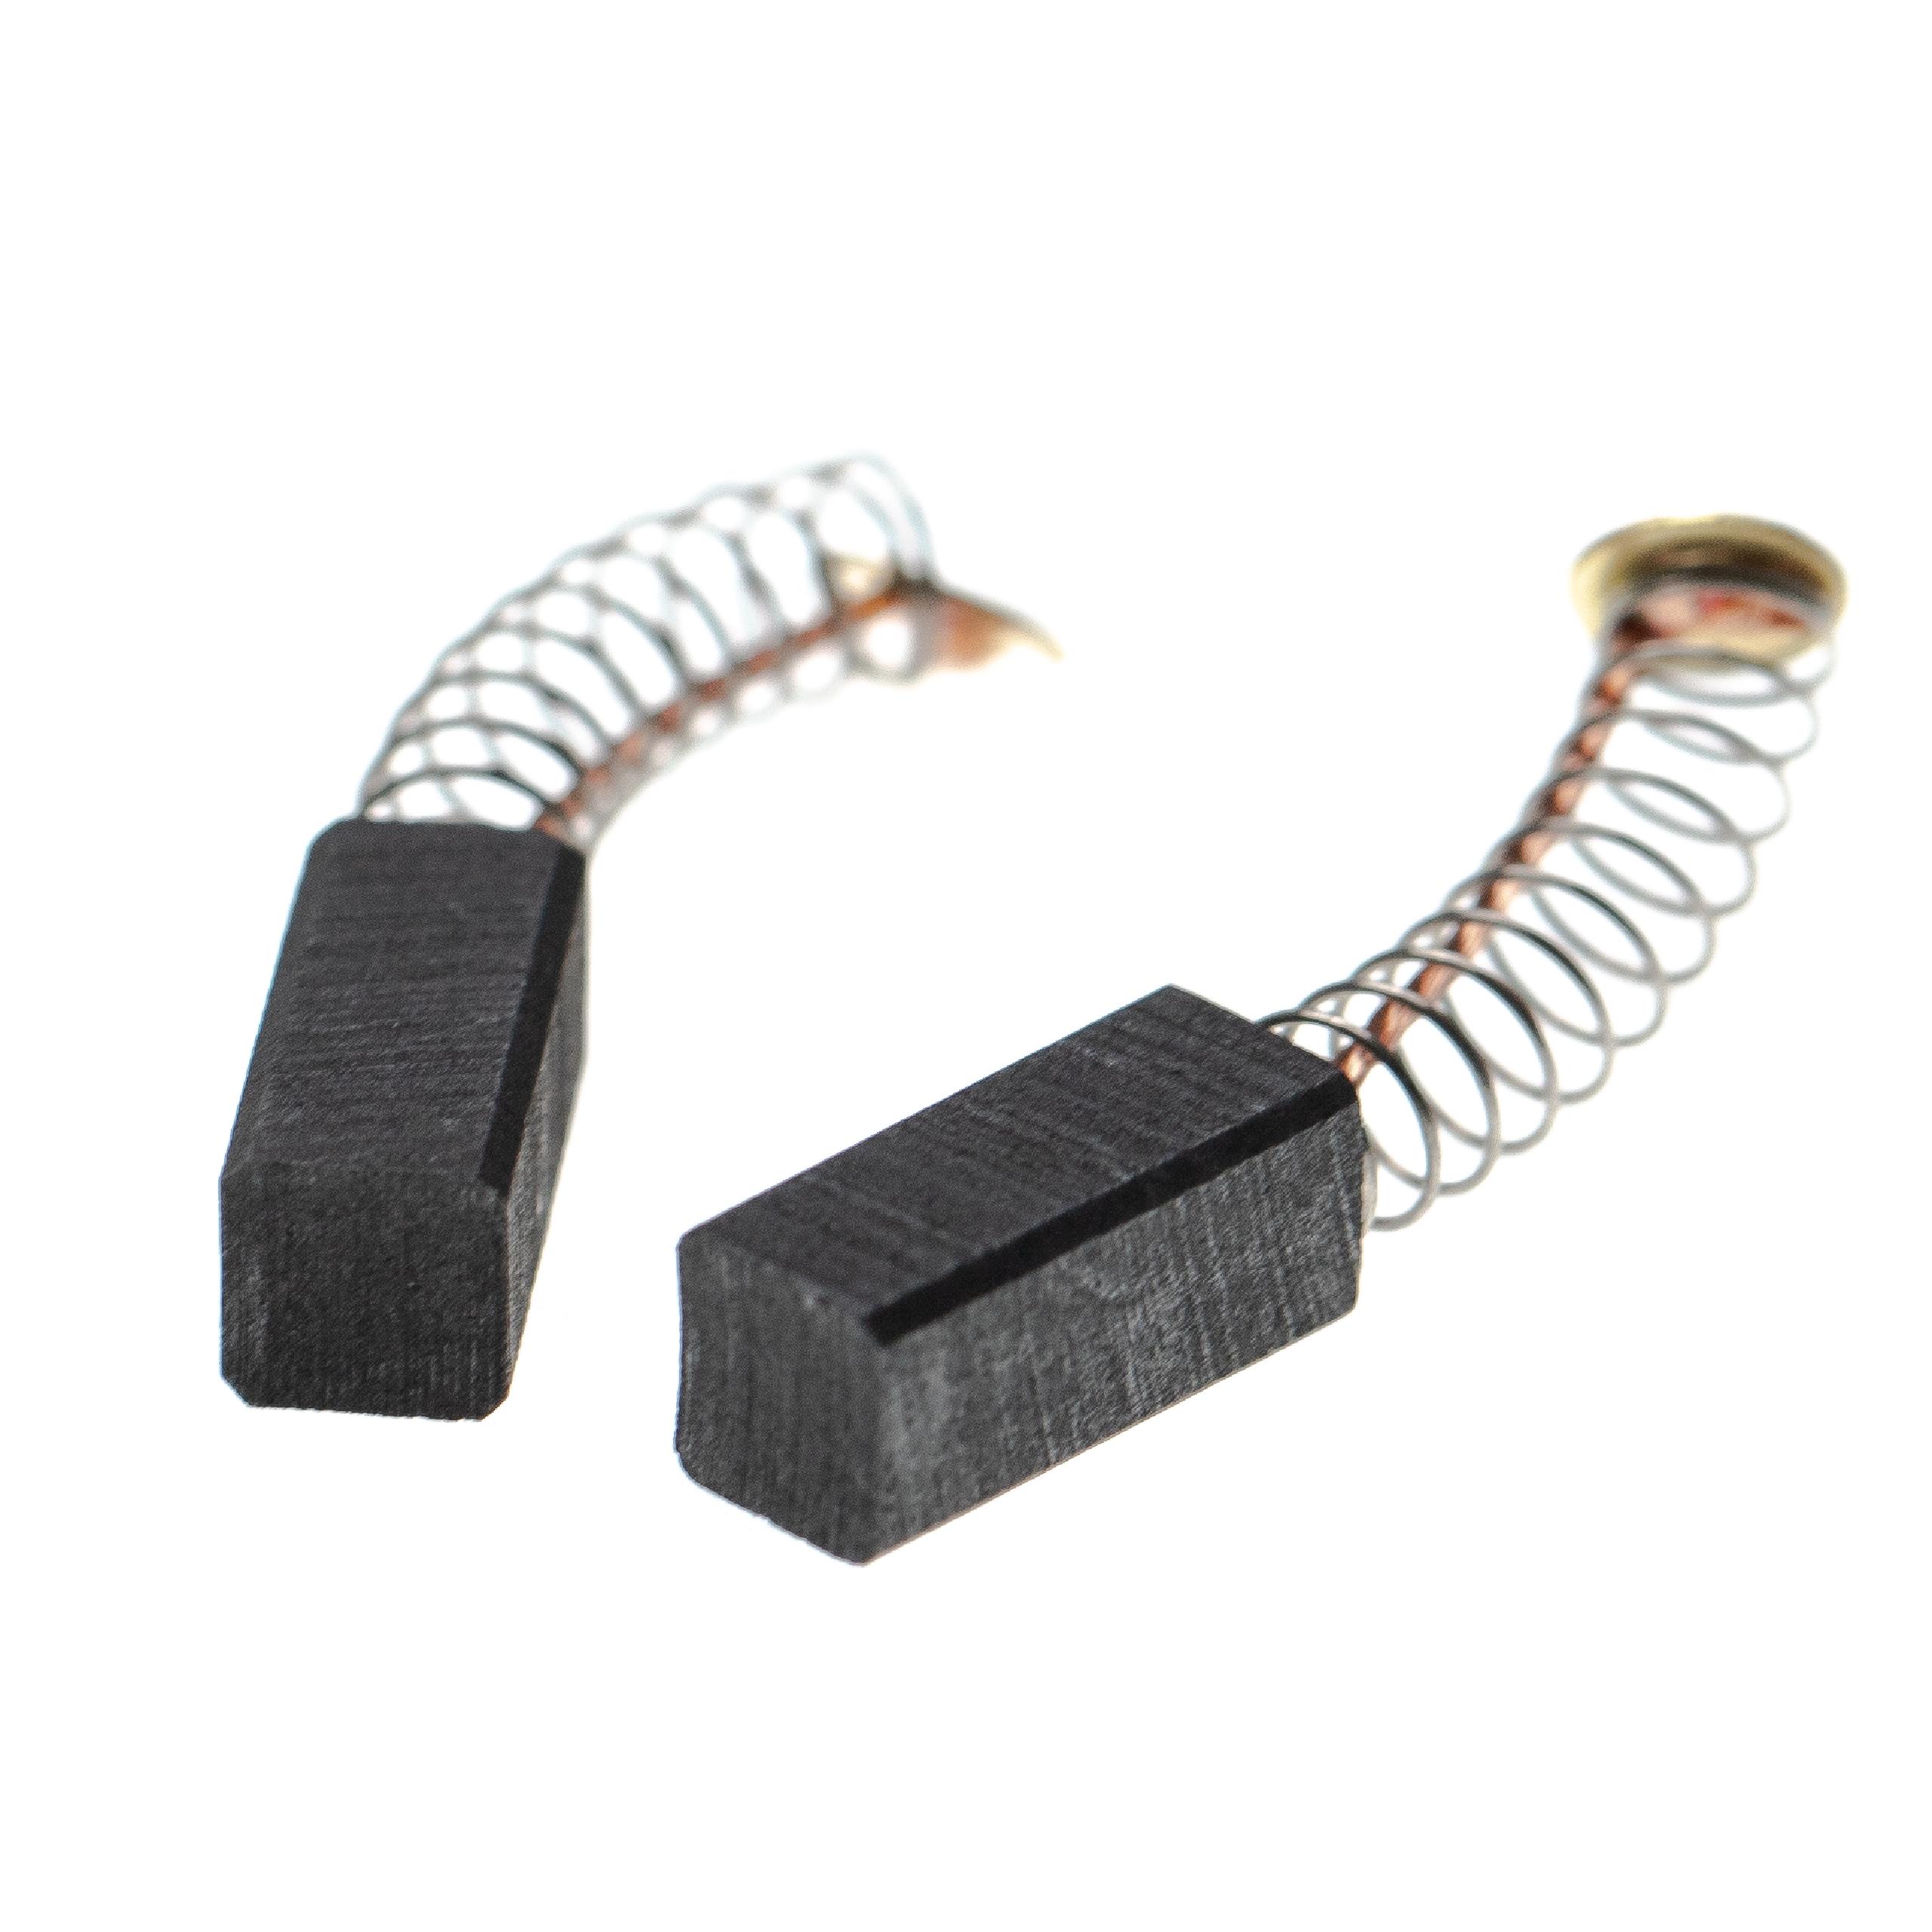 2x Carbon Brush as Replacement for Metabo 316033390 Electric Power Tools + Spring, 14 x 6 x 6mm